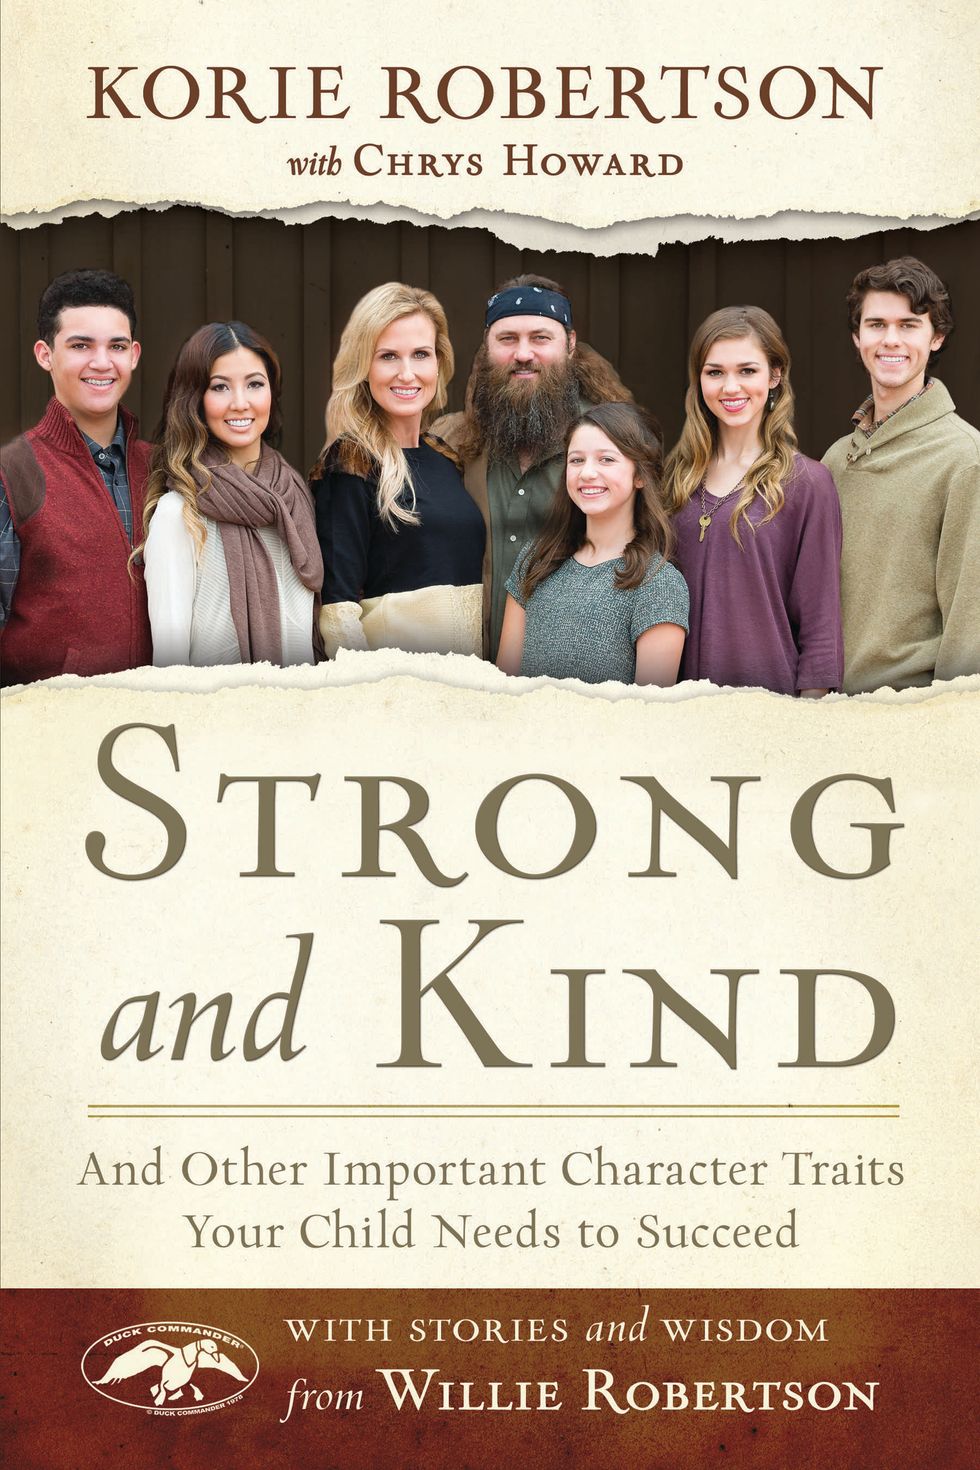 Korie Robertson on Parenting: It's Ok to Cry in Front of Your Kids